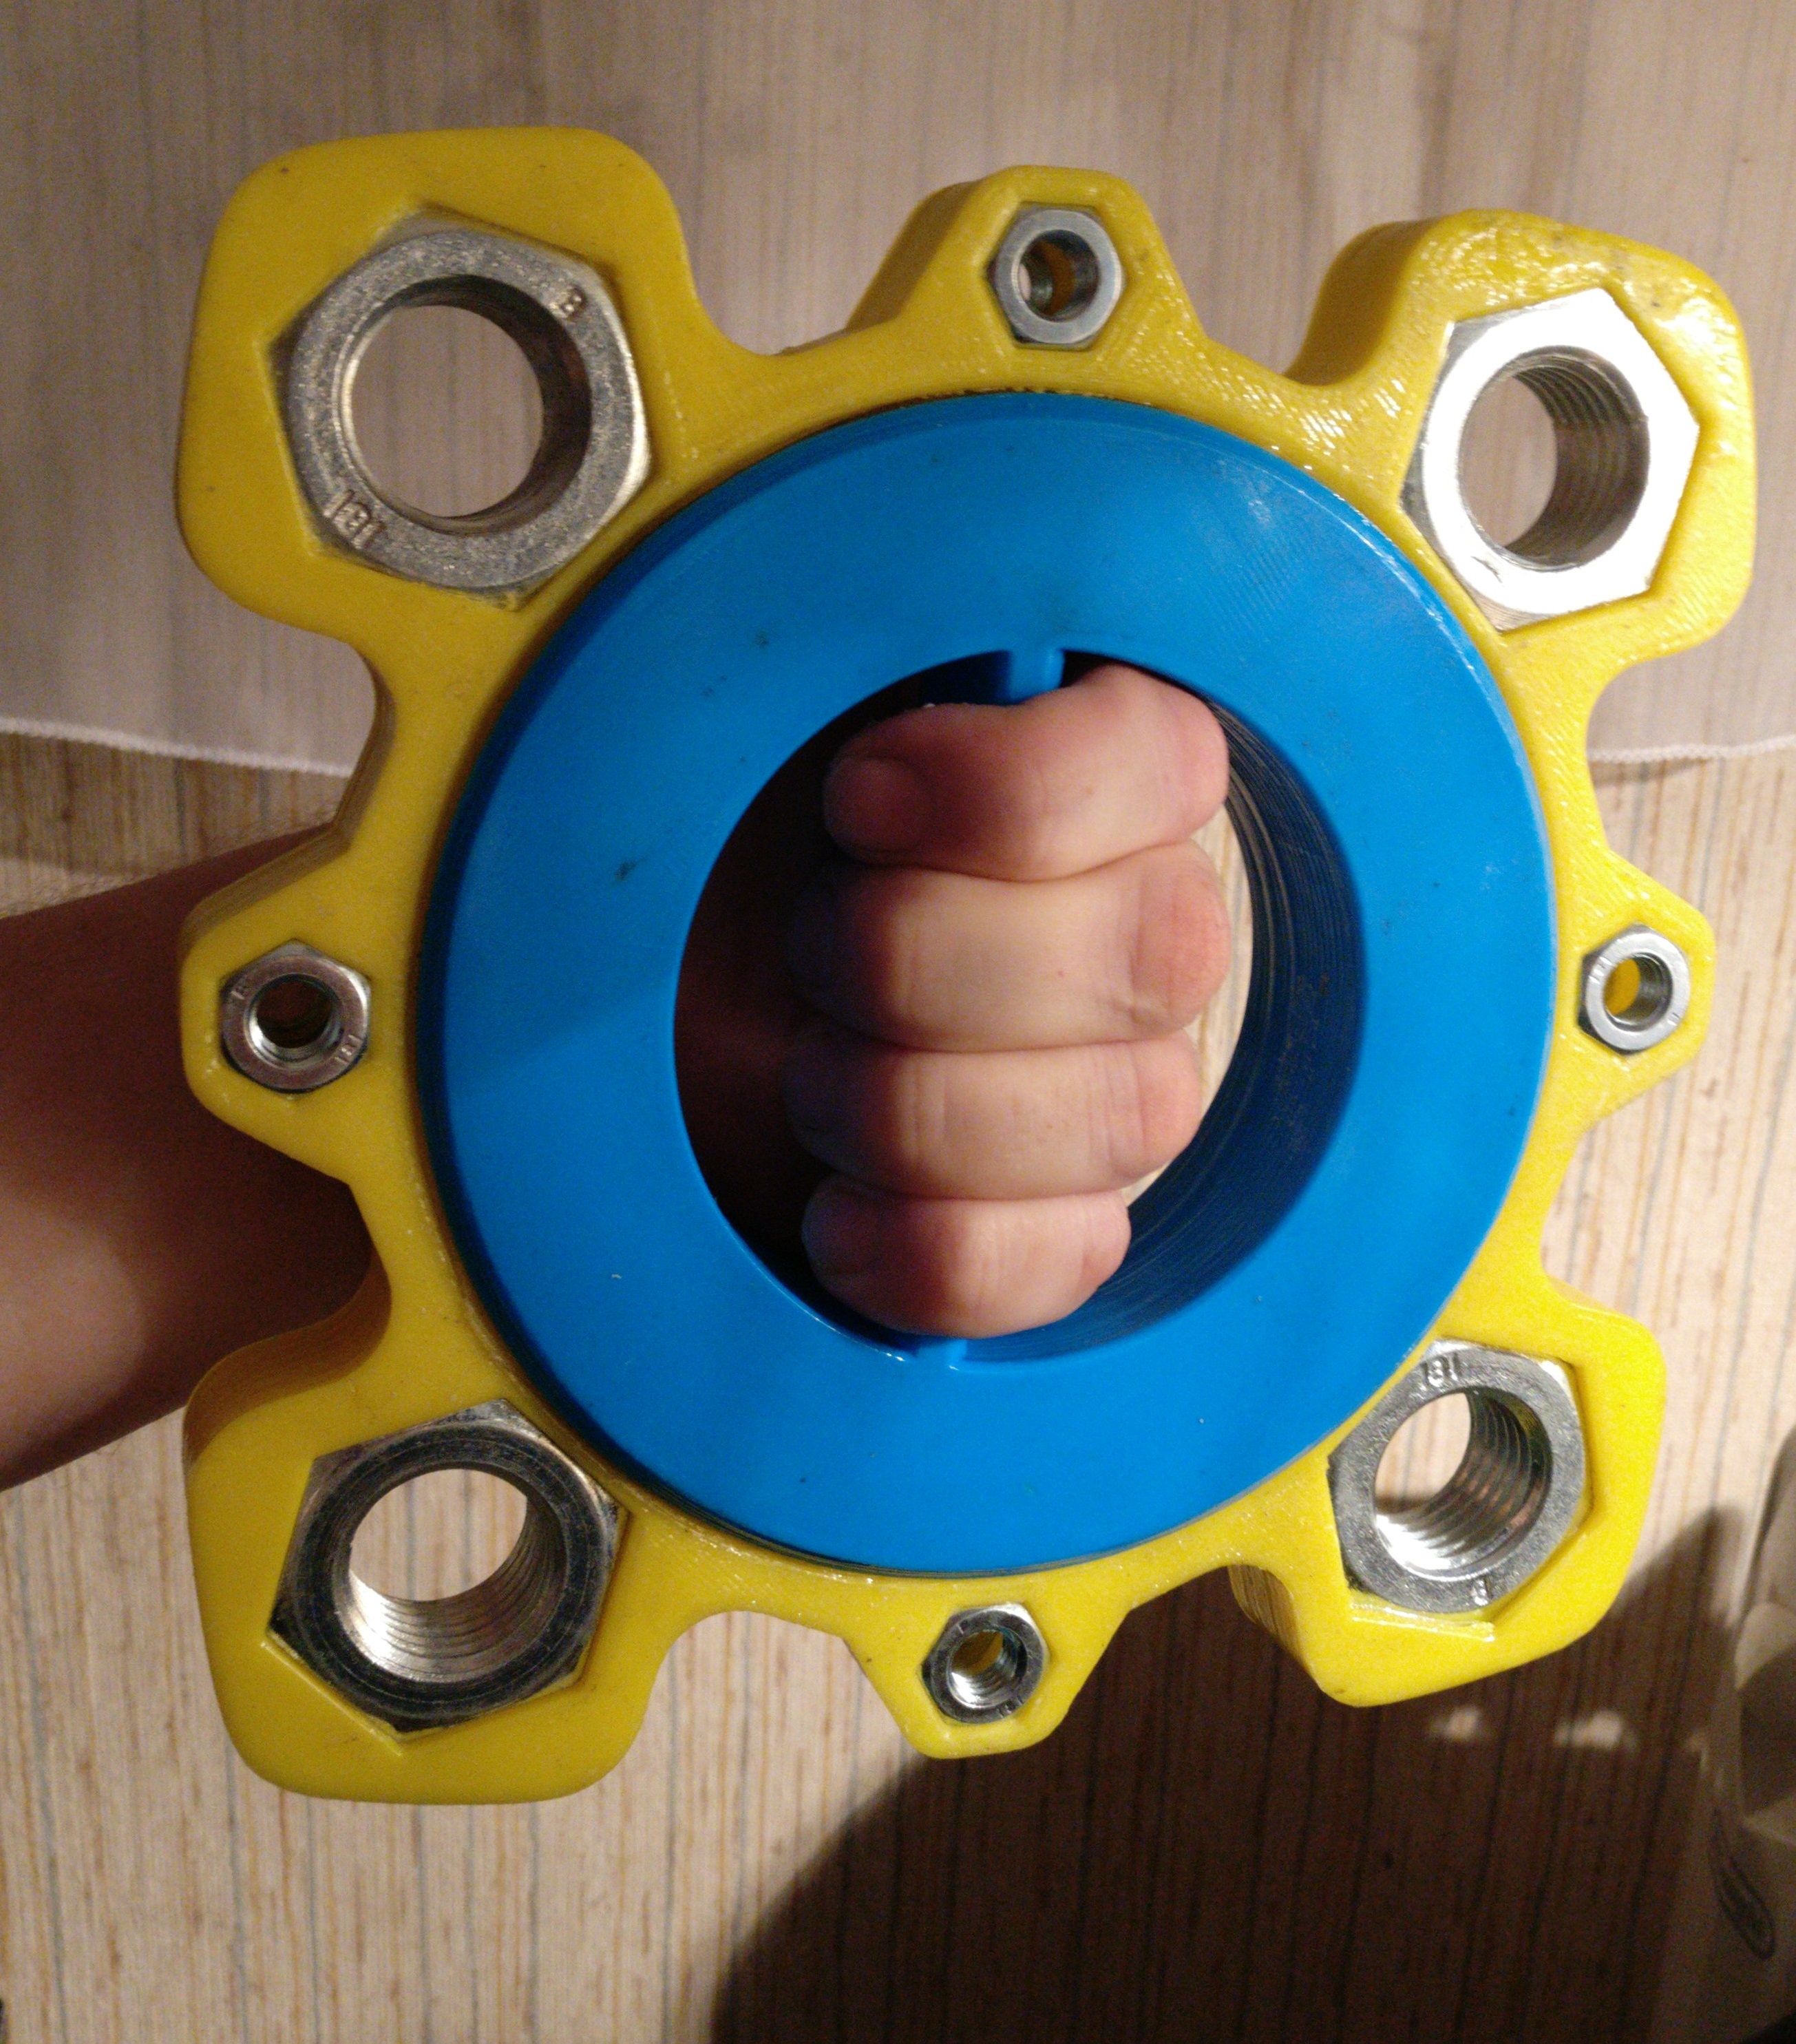 Giant fidget spinner, 6020 bearing and M27 + M10 nuts